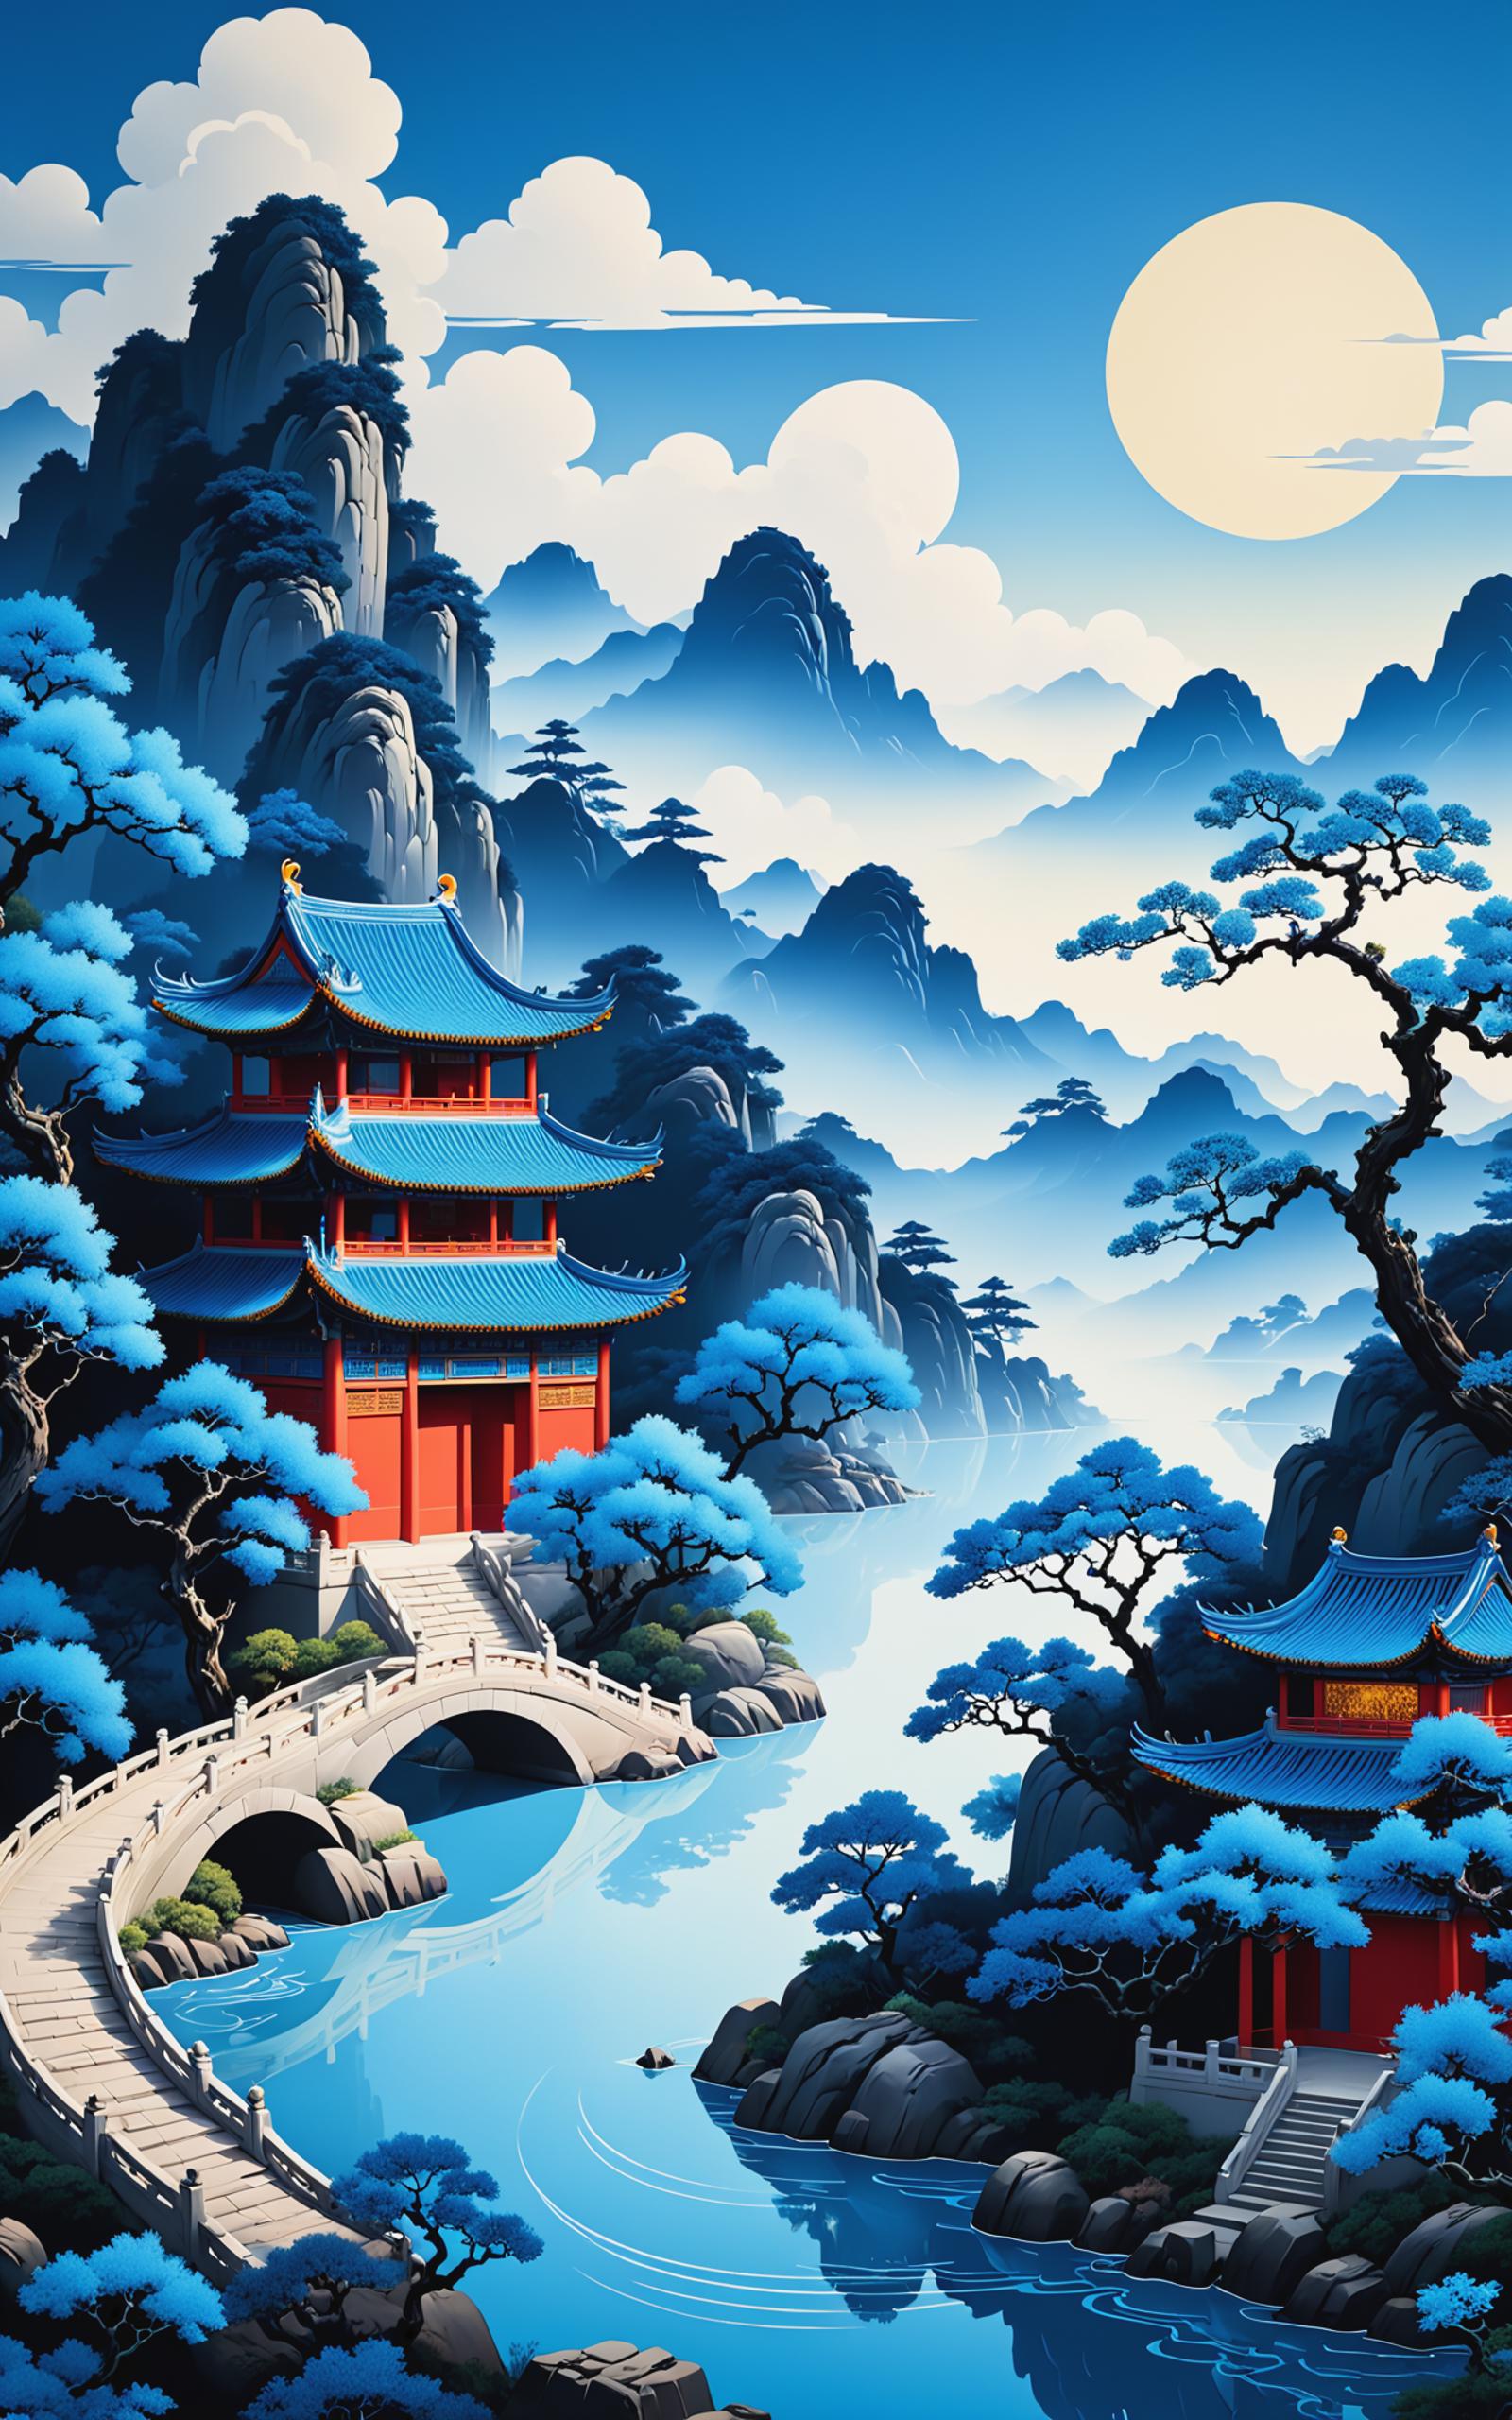 A beautifully painted scene of a pagoda and a bridge in a mountainous area with a lake.